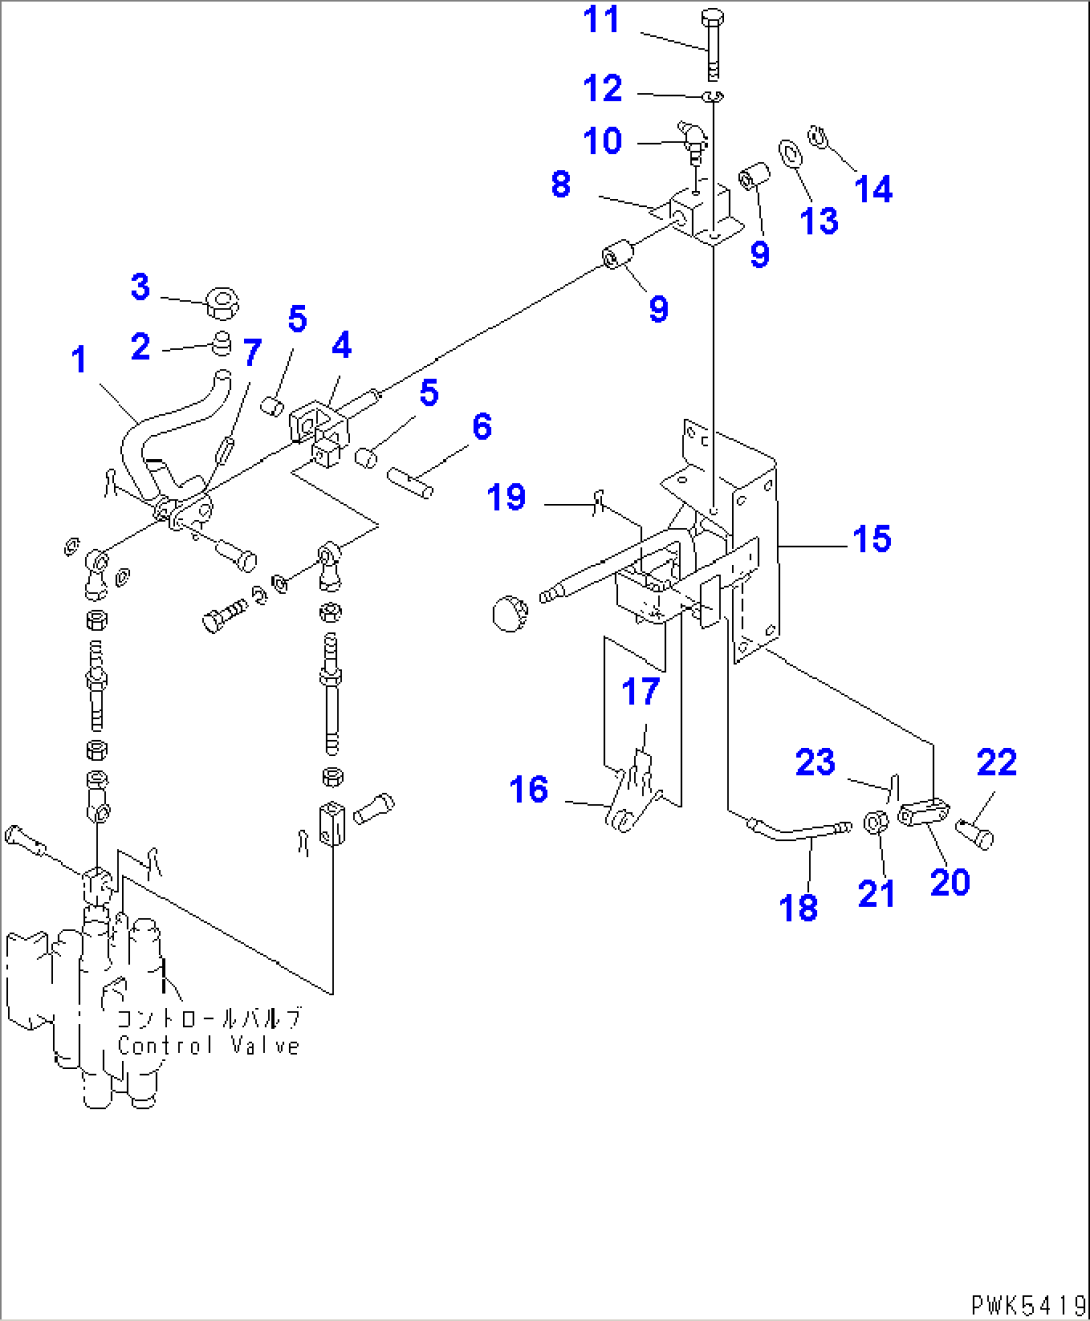 WORK EQUIPMENT CONTROL (LEVER¤ 1/3) (FOR ANGLE DOZER)